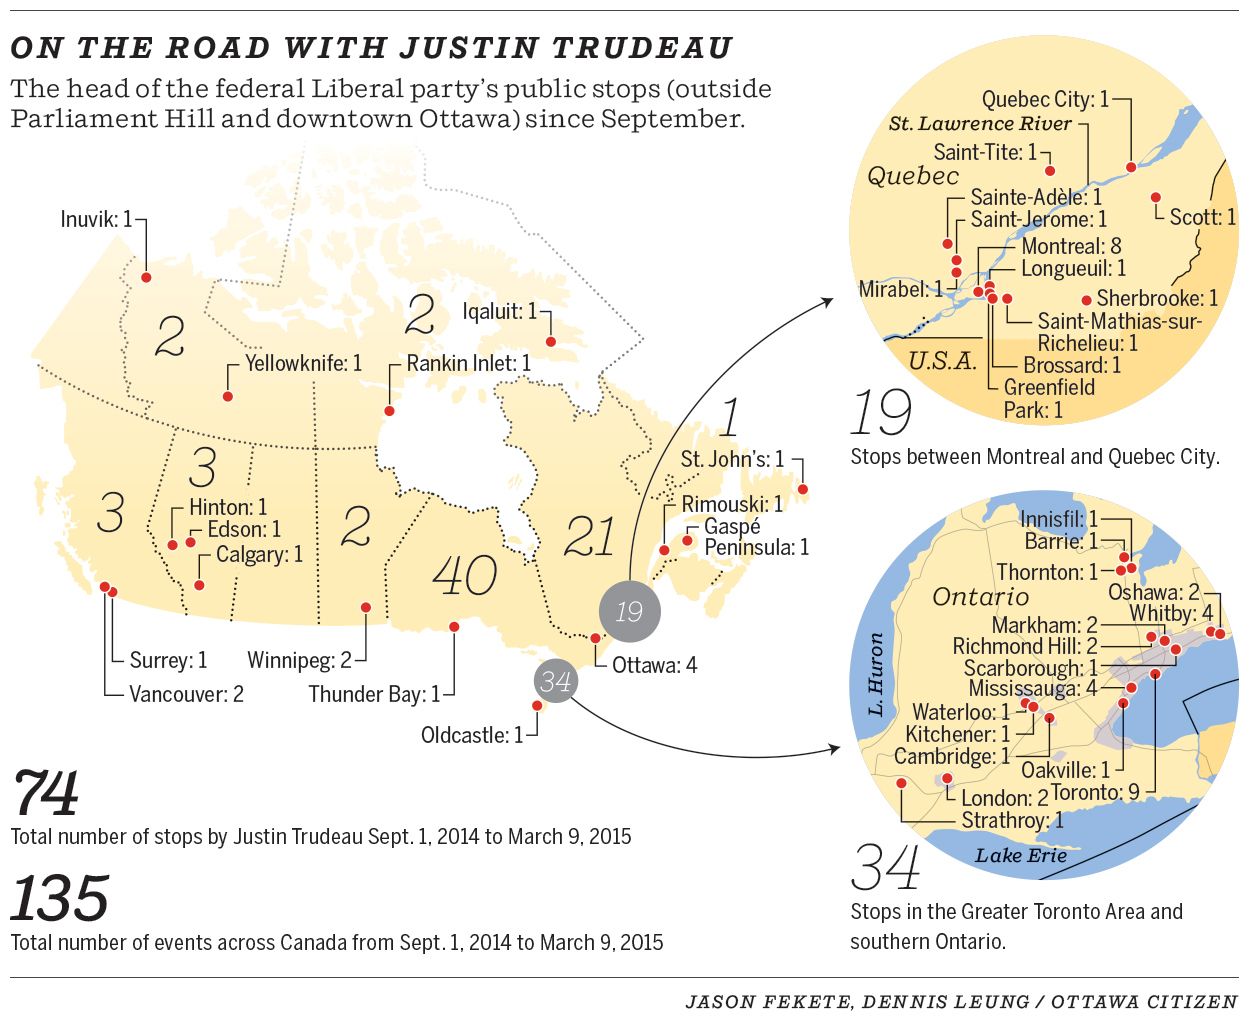 On the road with Justin Trudeau